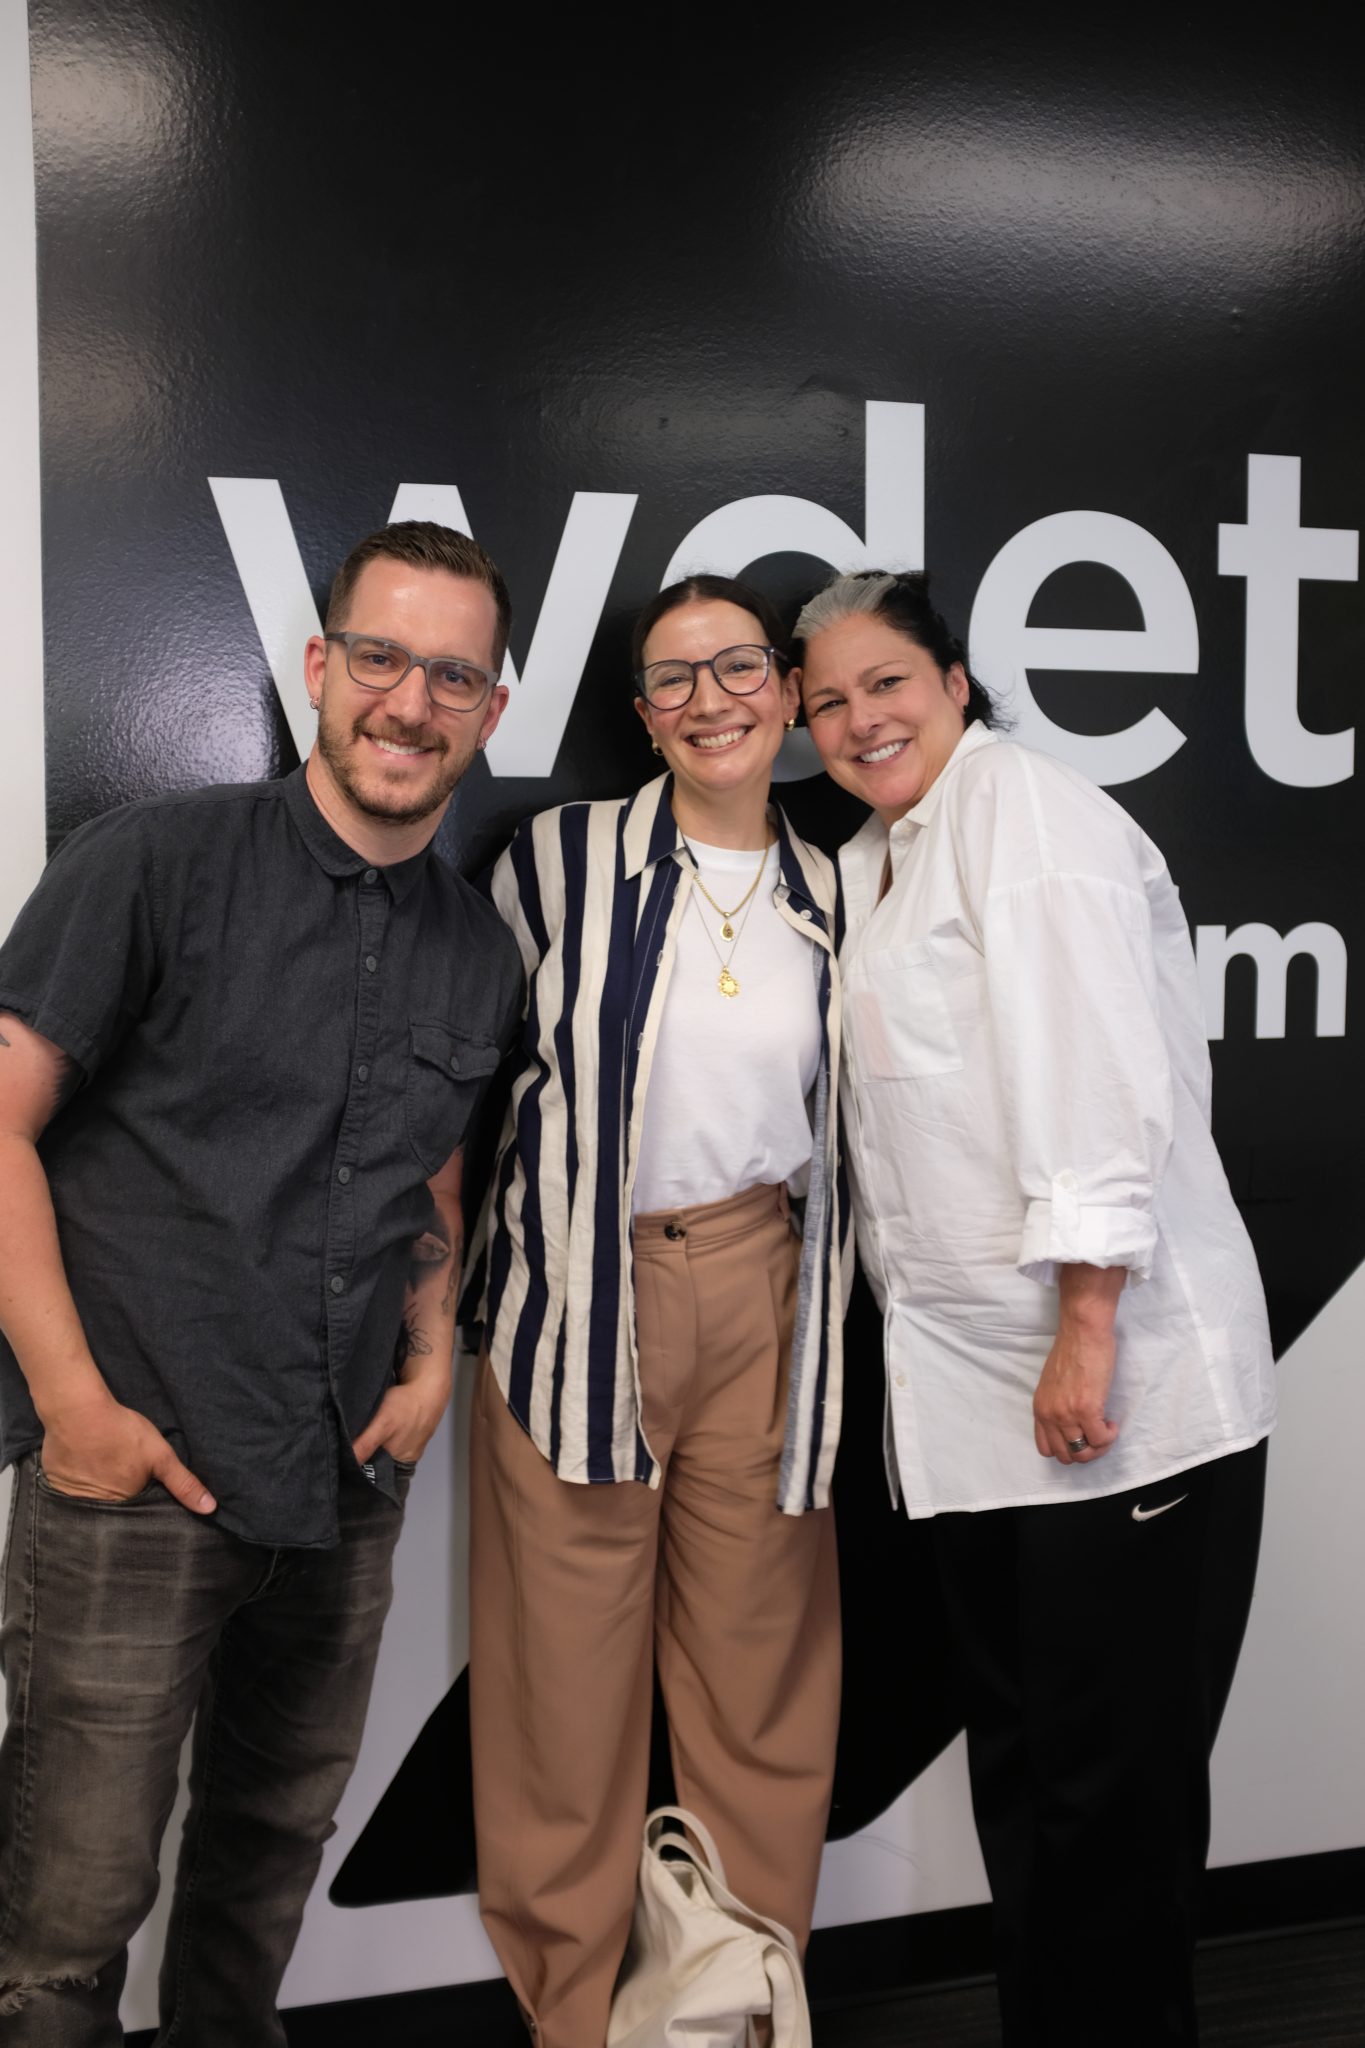 Warda Bouguettaya (middle) poses with "Essential Cooking" hosts Ann Delisi and Chef James Rigato at WDET's studios.